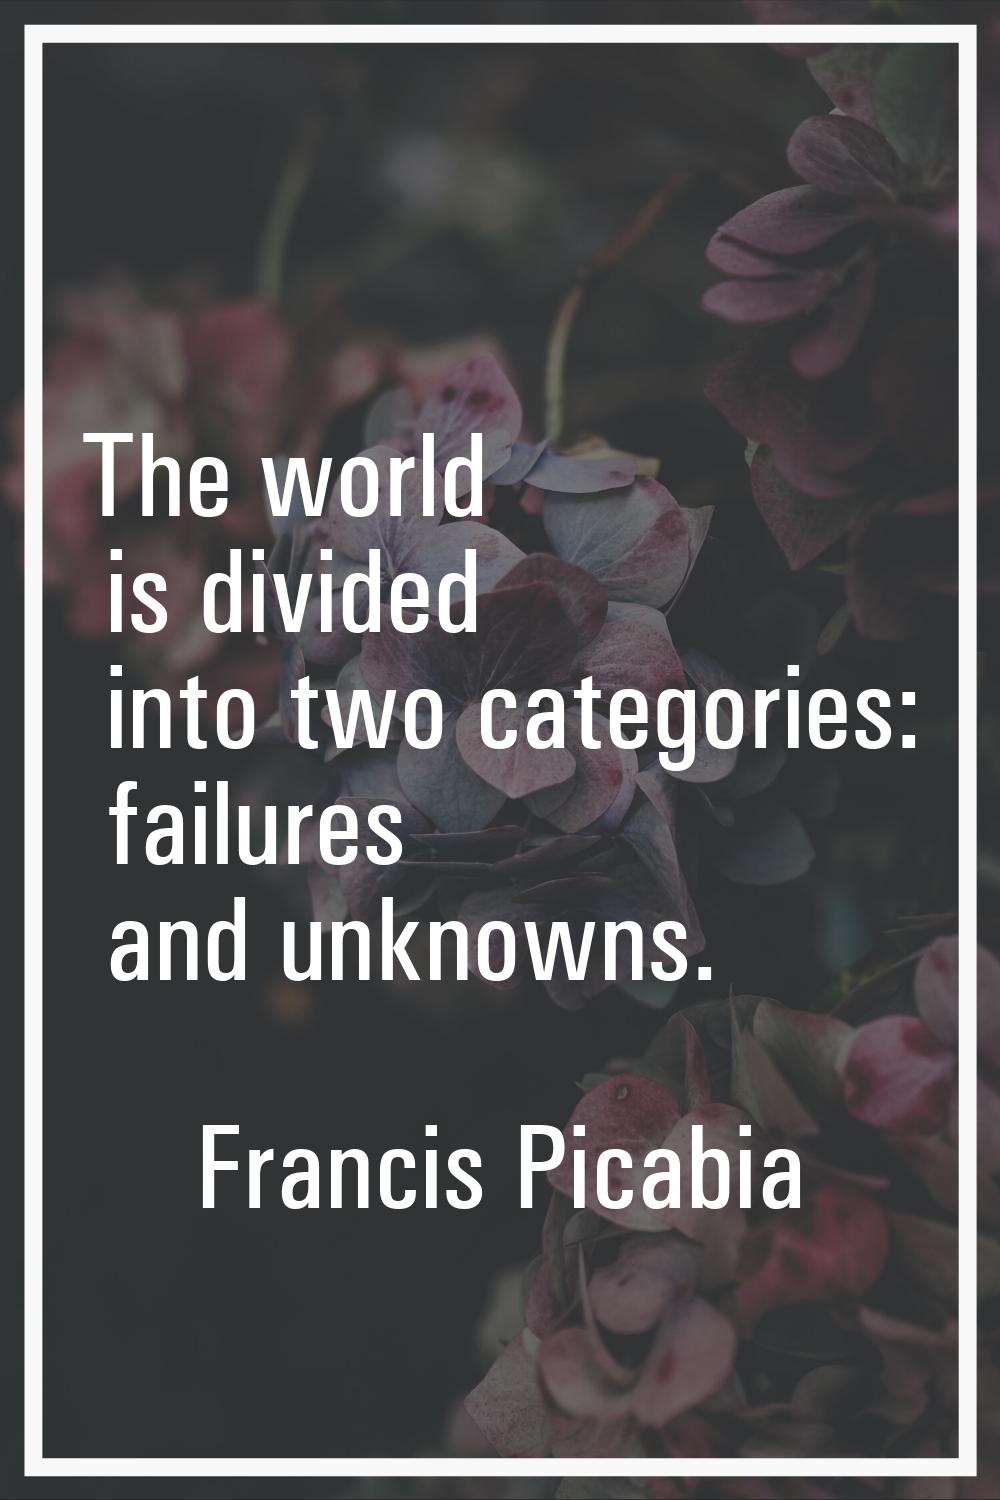 The world is divided into two categories: failures and unknowns.